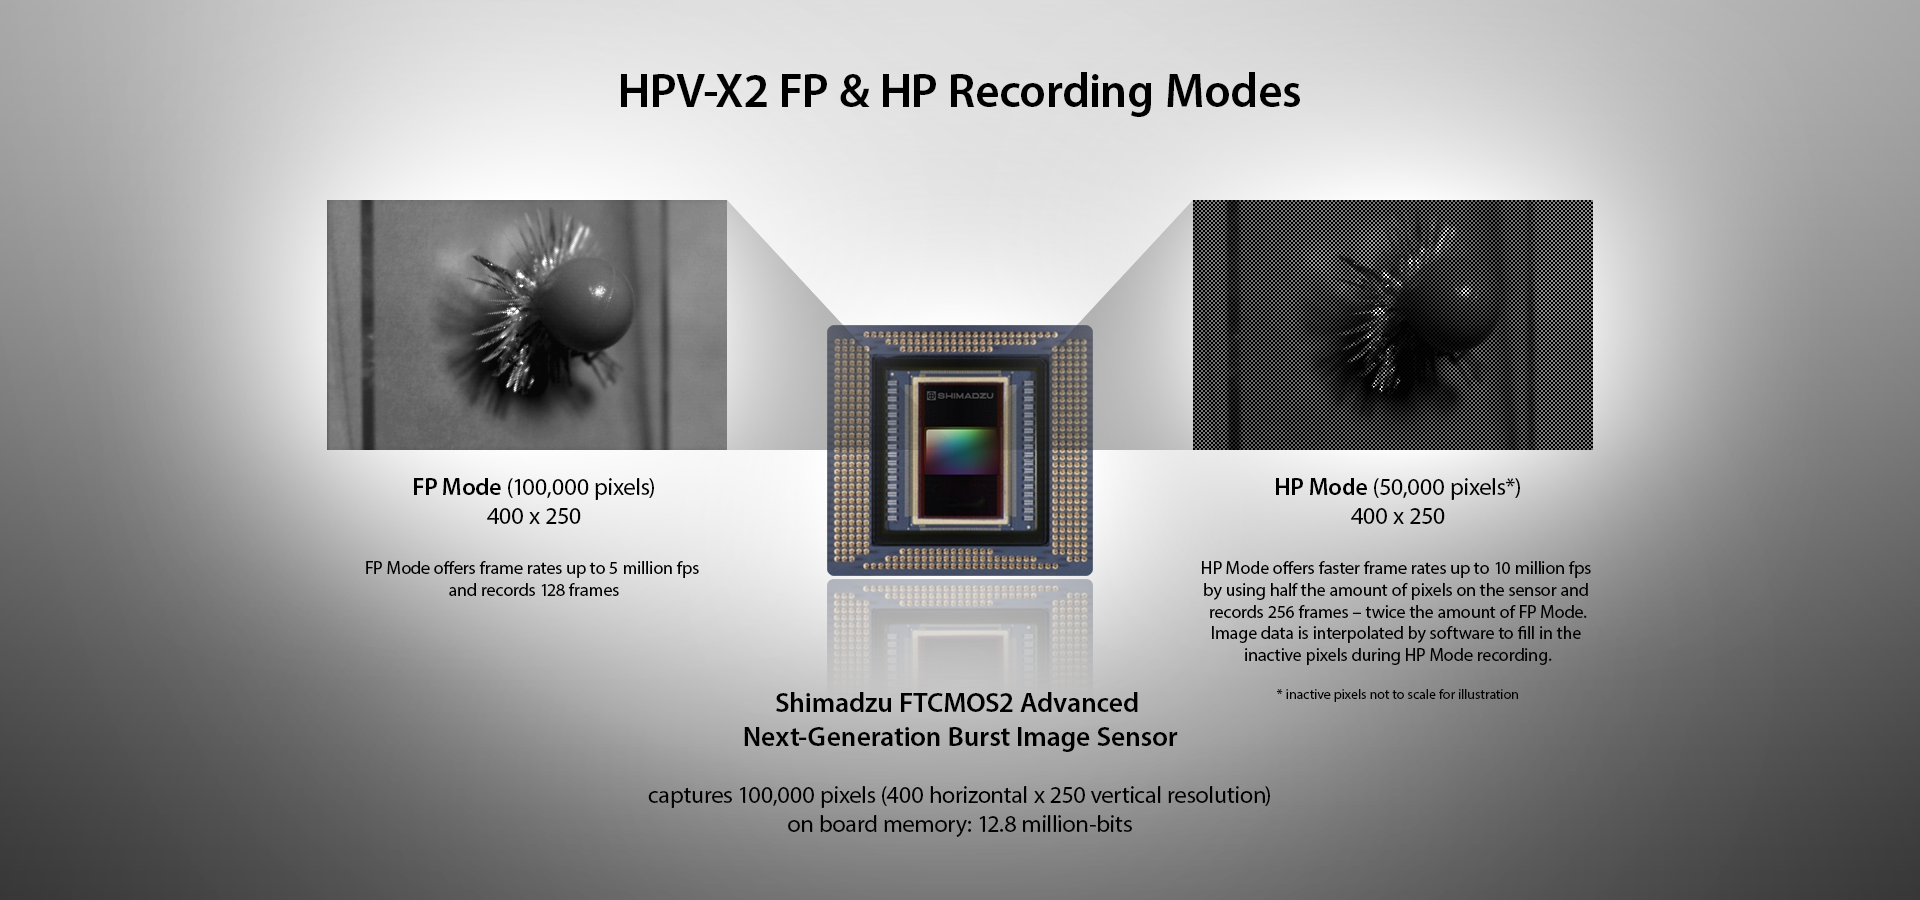 Shimadzu HPV-X2 FP and HP Modes feature image.